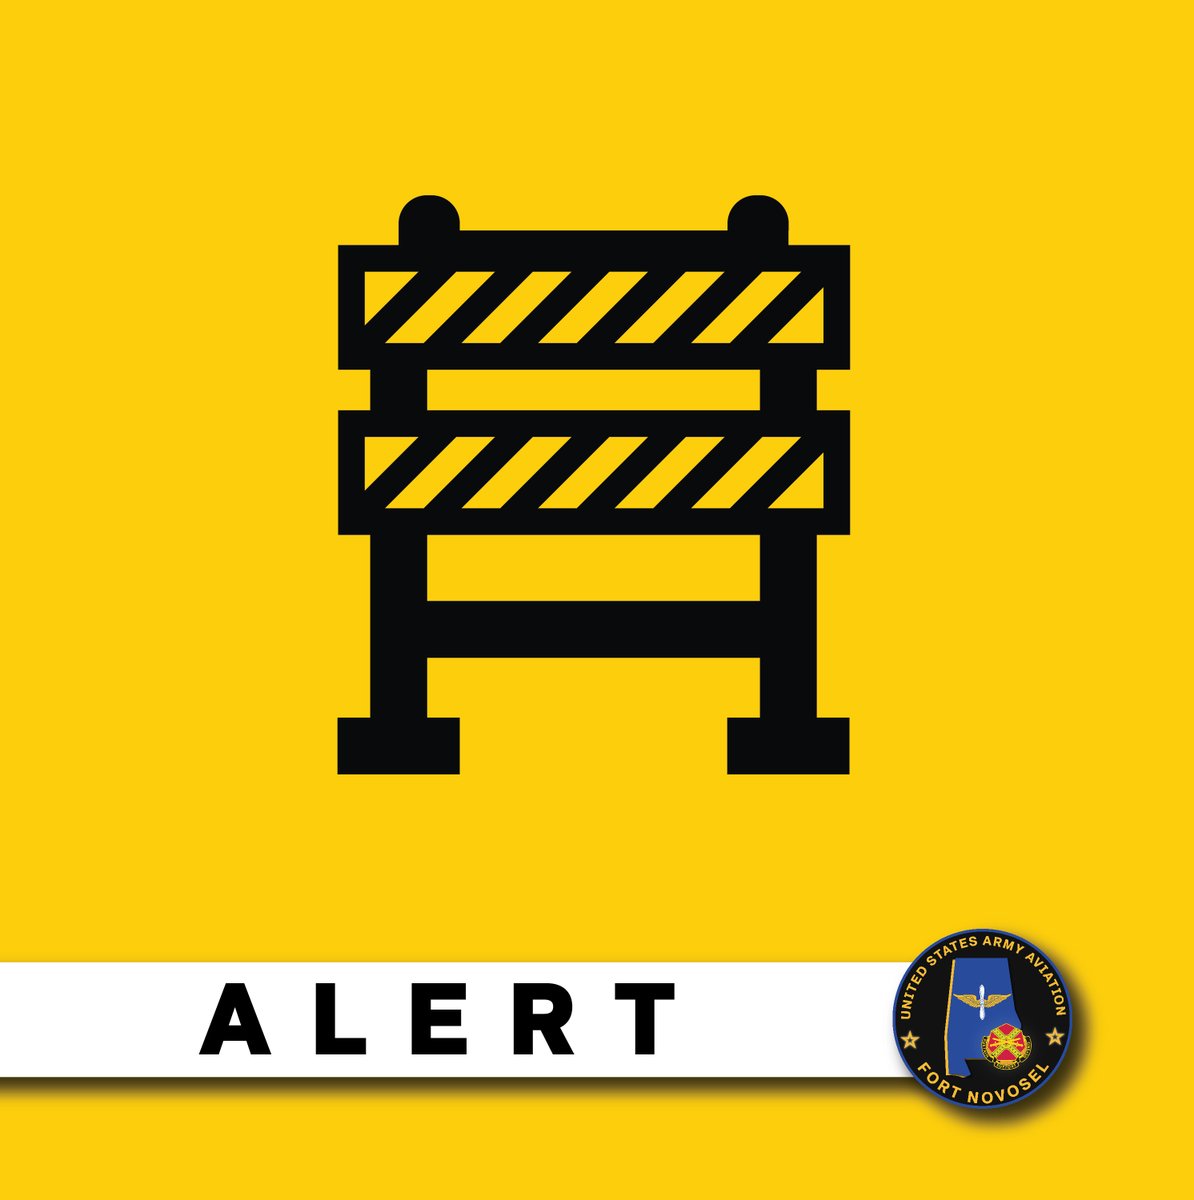 Daleville Gate will have reduced lanes May 20 – June 7 from 1 – 4:30 p.m. One lane at a time will be closed for construction. Flagmen and signs will be there to aid traffic flow. Please use caution and patience when entering or exiting the post during this time.